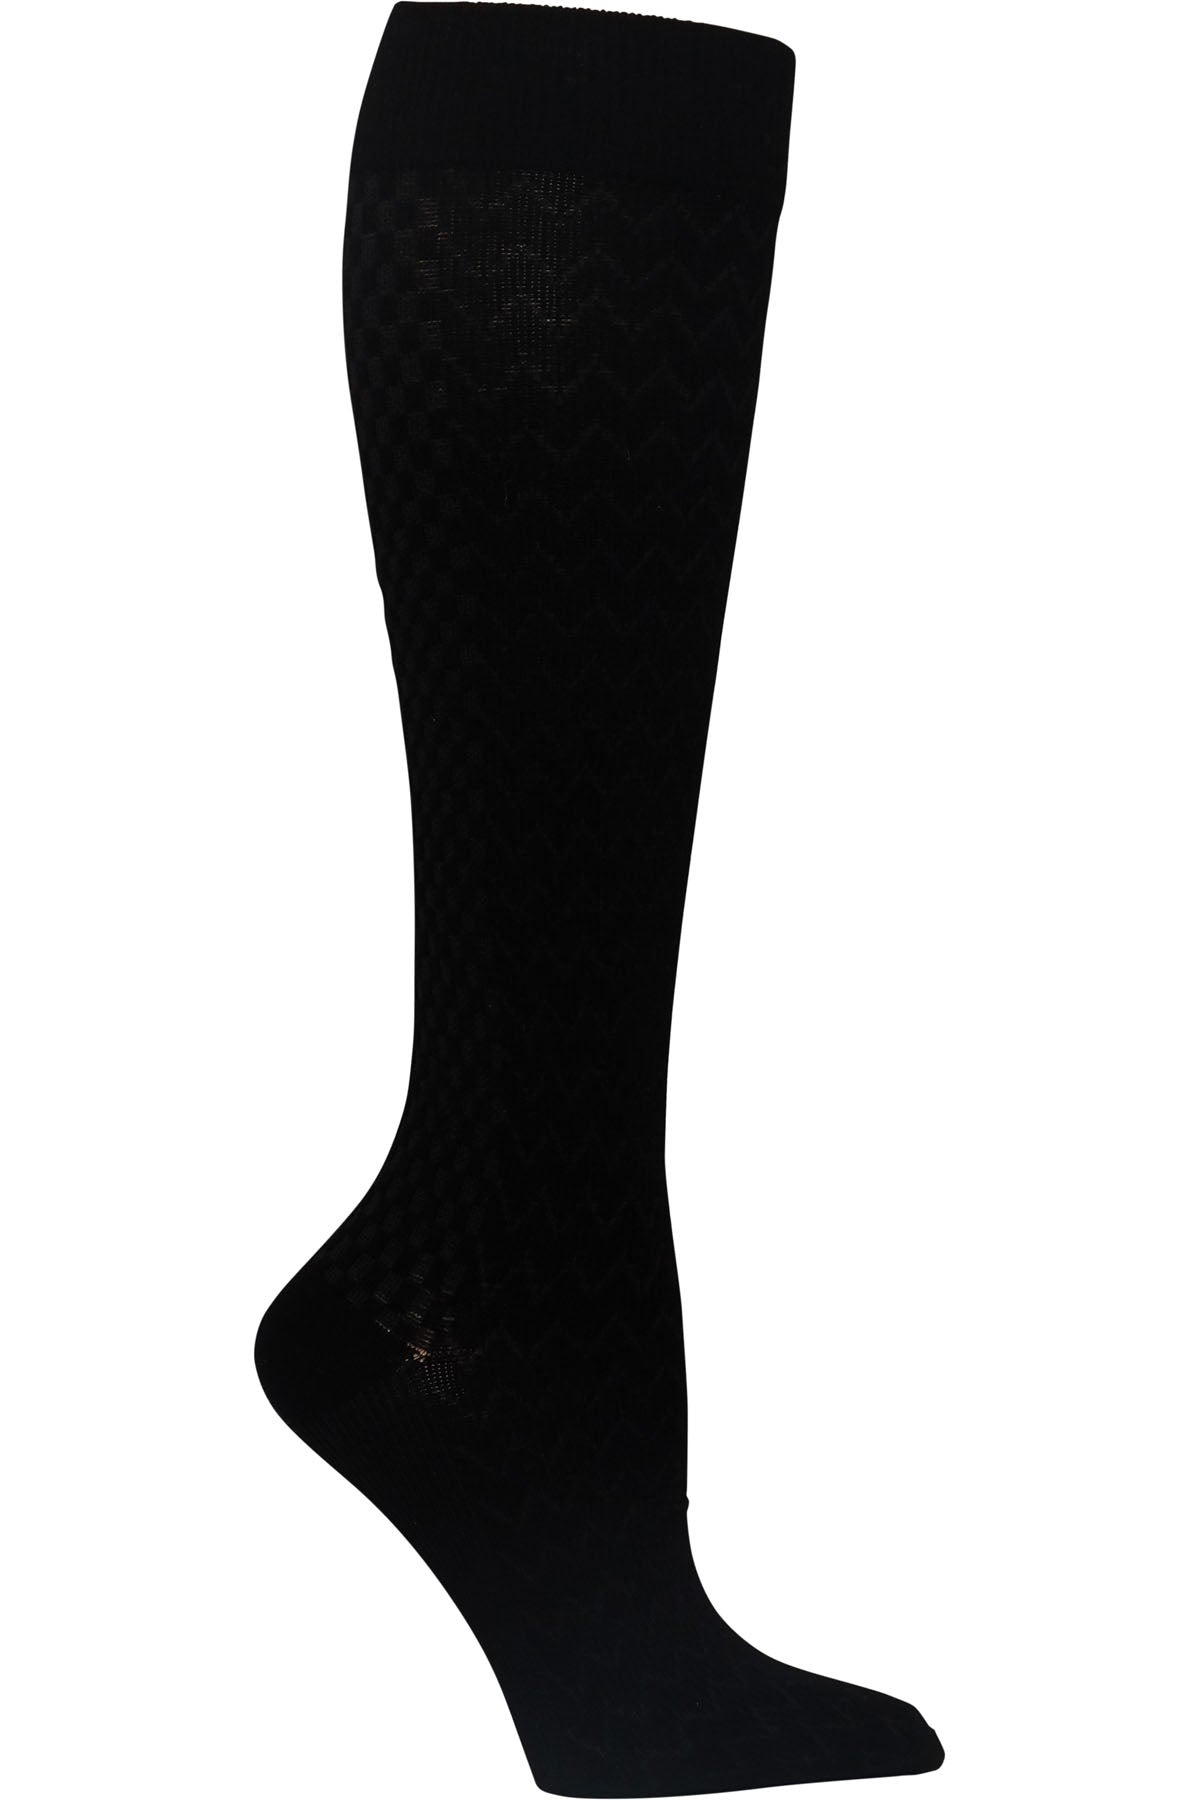 Cherokee Mild Compression Socks True Support 10-15 mmHg in Black at Parker's Clothing and Shoes.